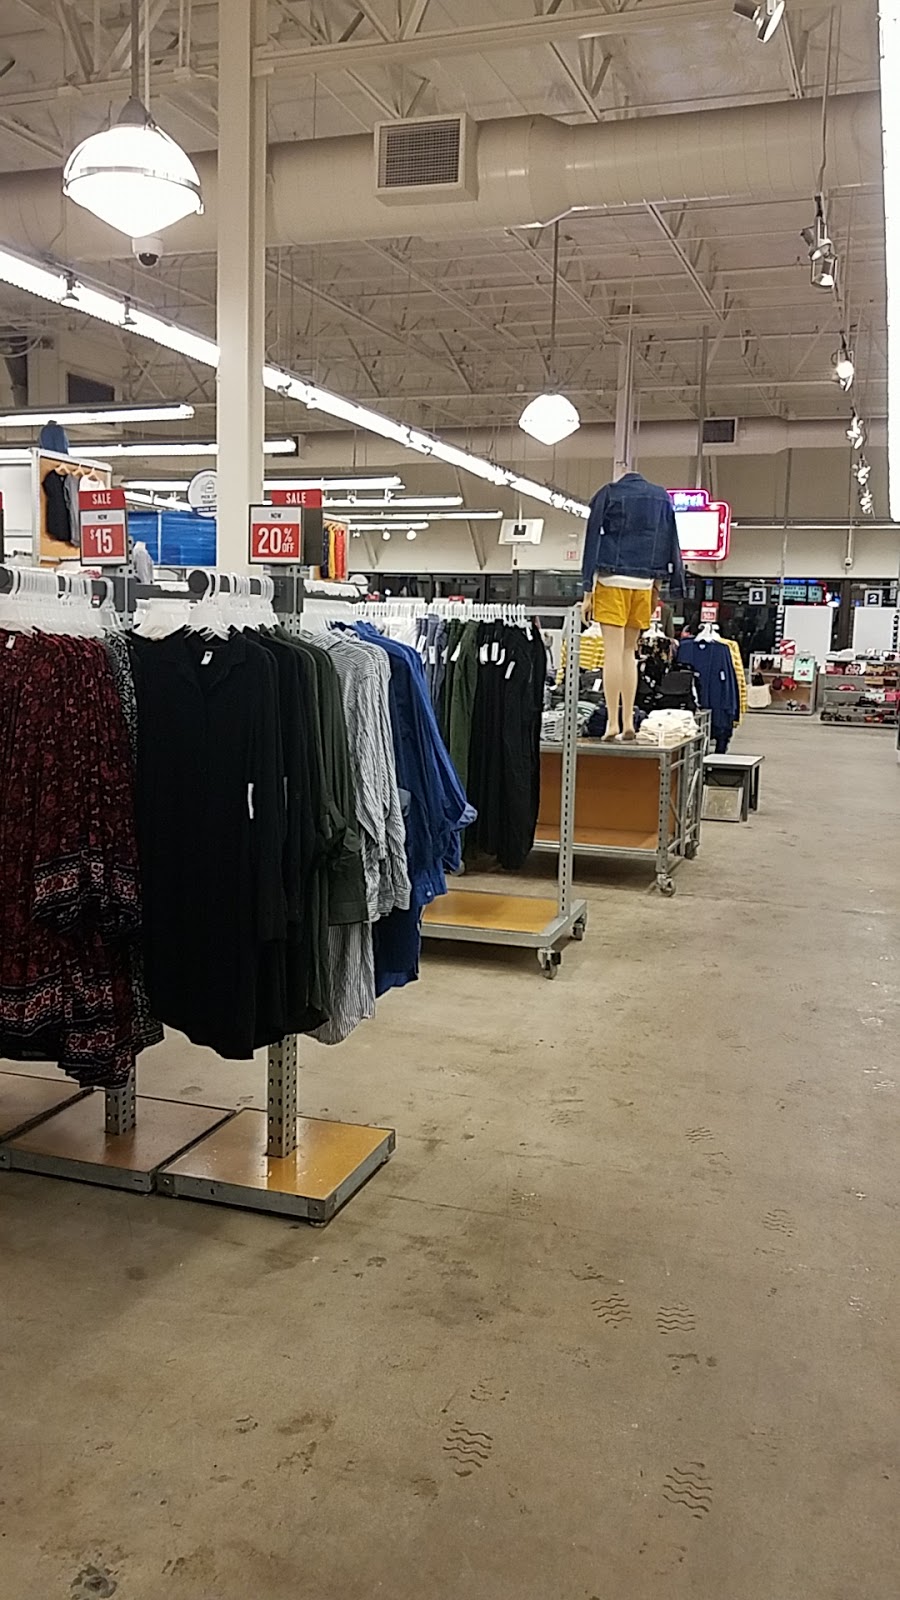 Old Navy | 346 W Army Trail Rd Ste #100, Bloomingdale, IL 60108 | Phone: (847) 610-7980